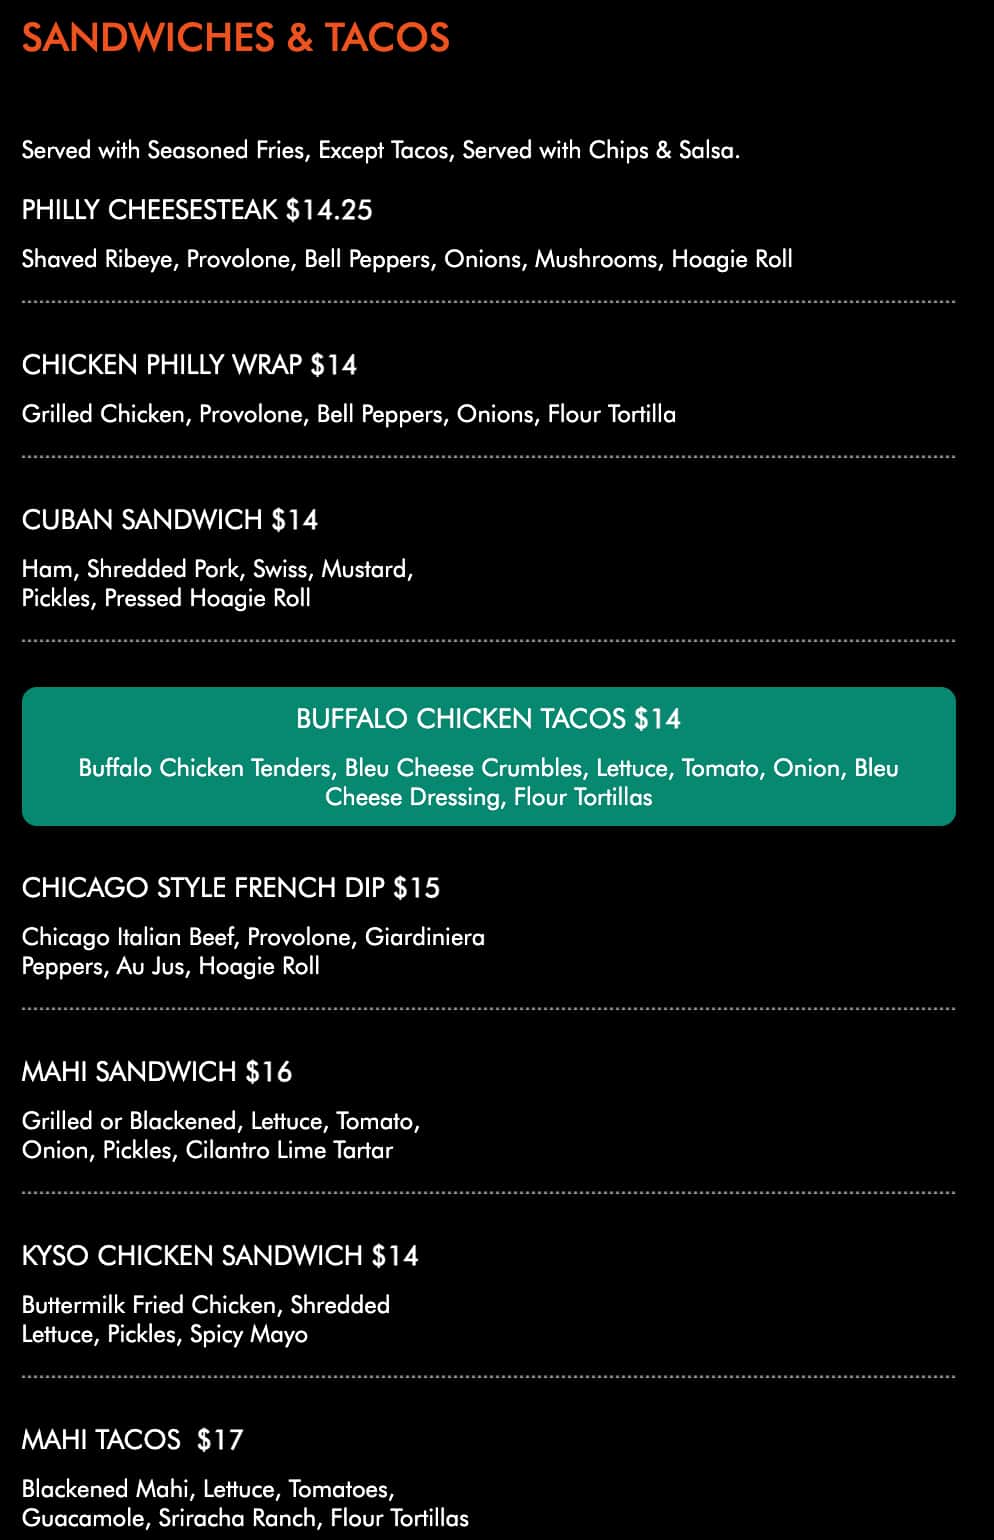 Bru's Room Bar & Grill Sandwiches and Tacos Menu